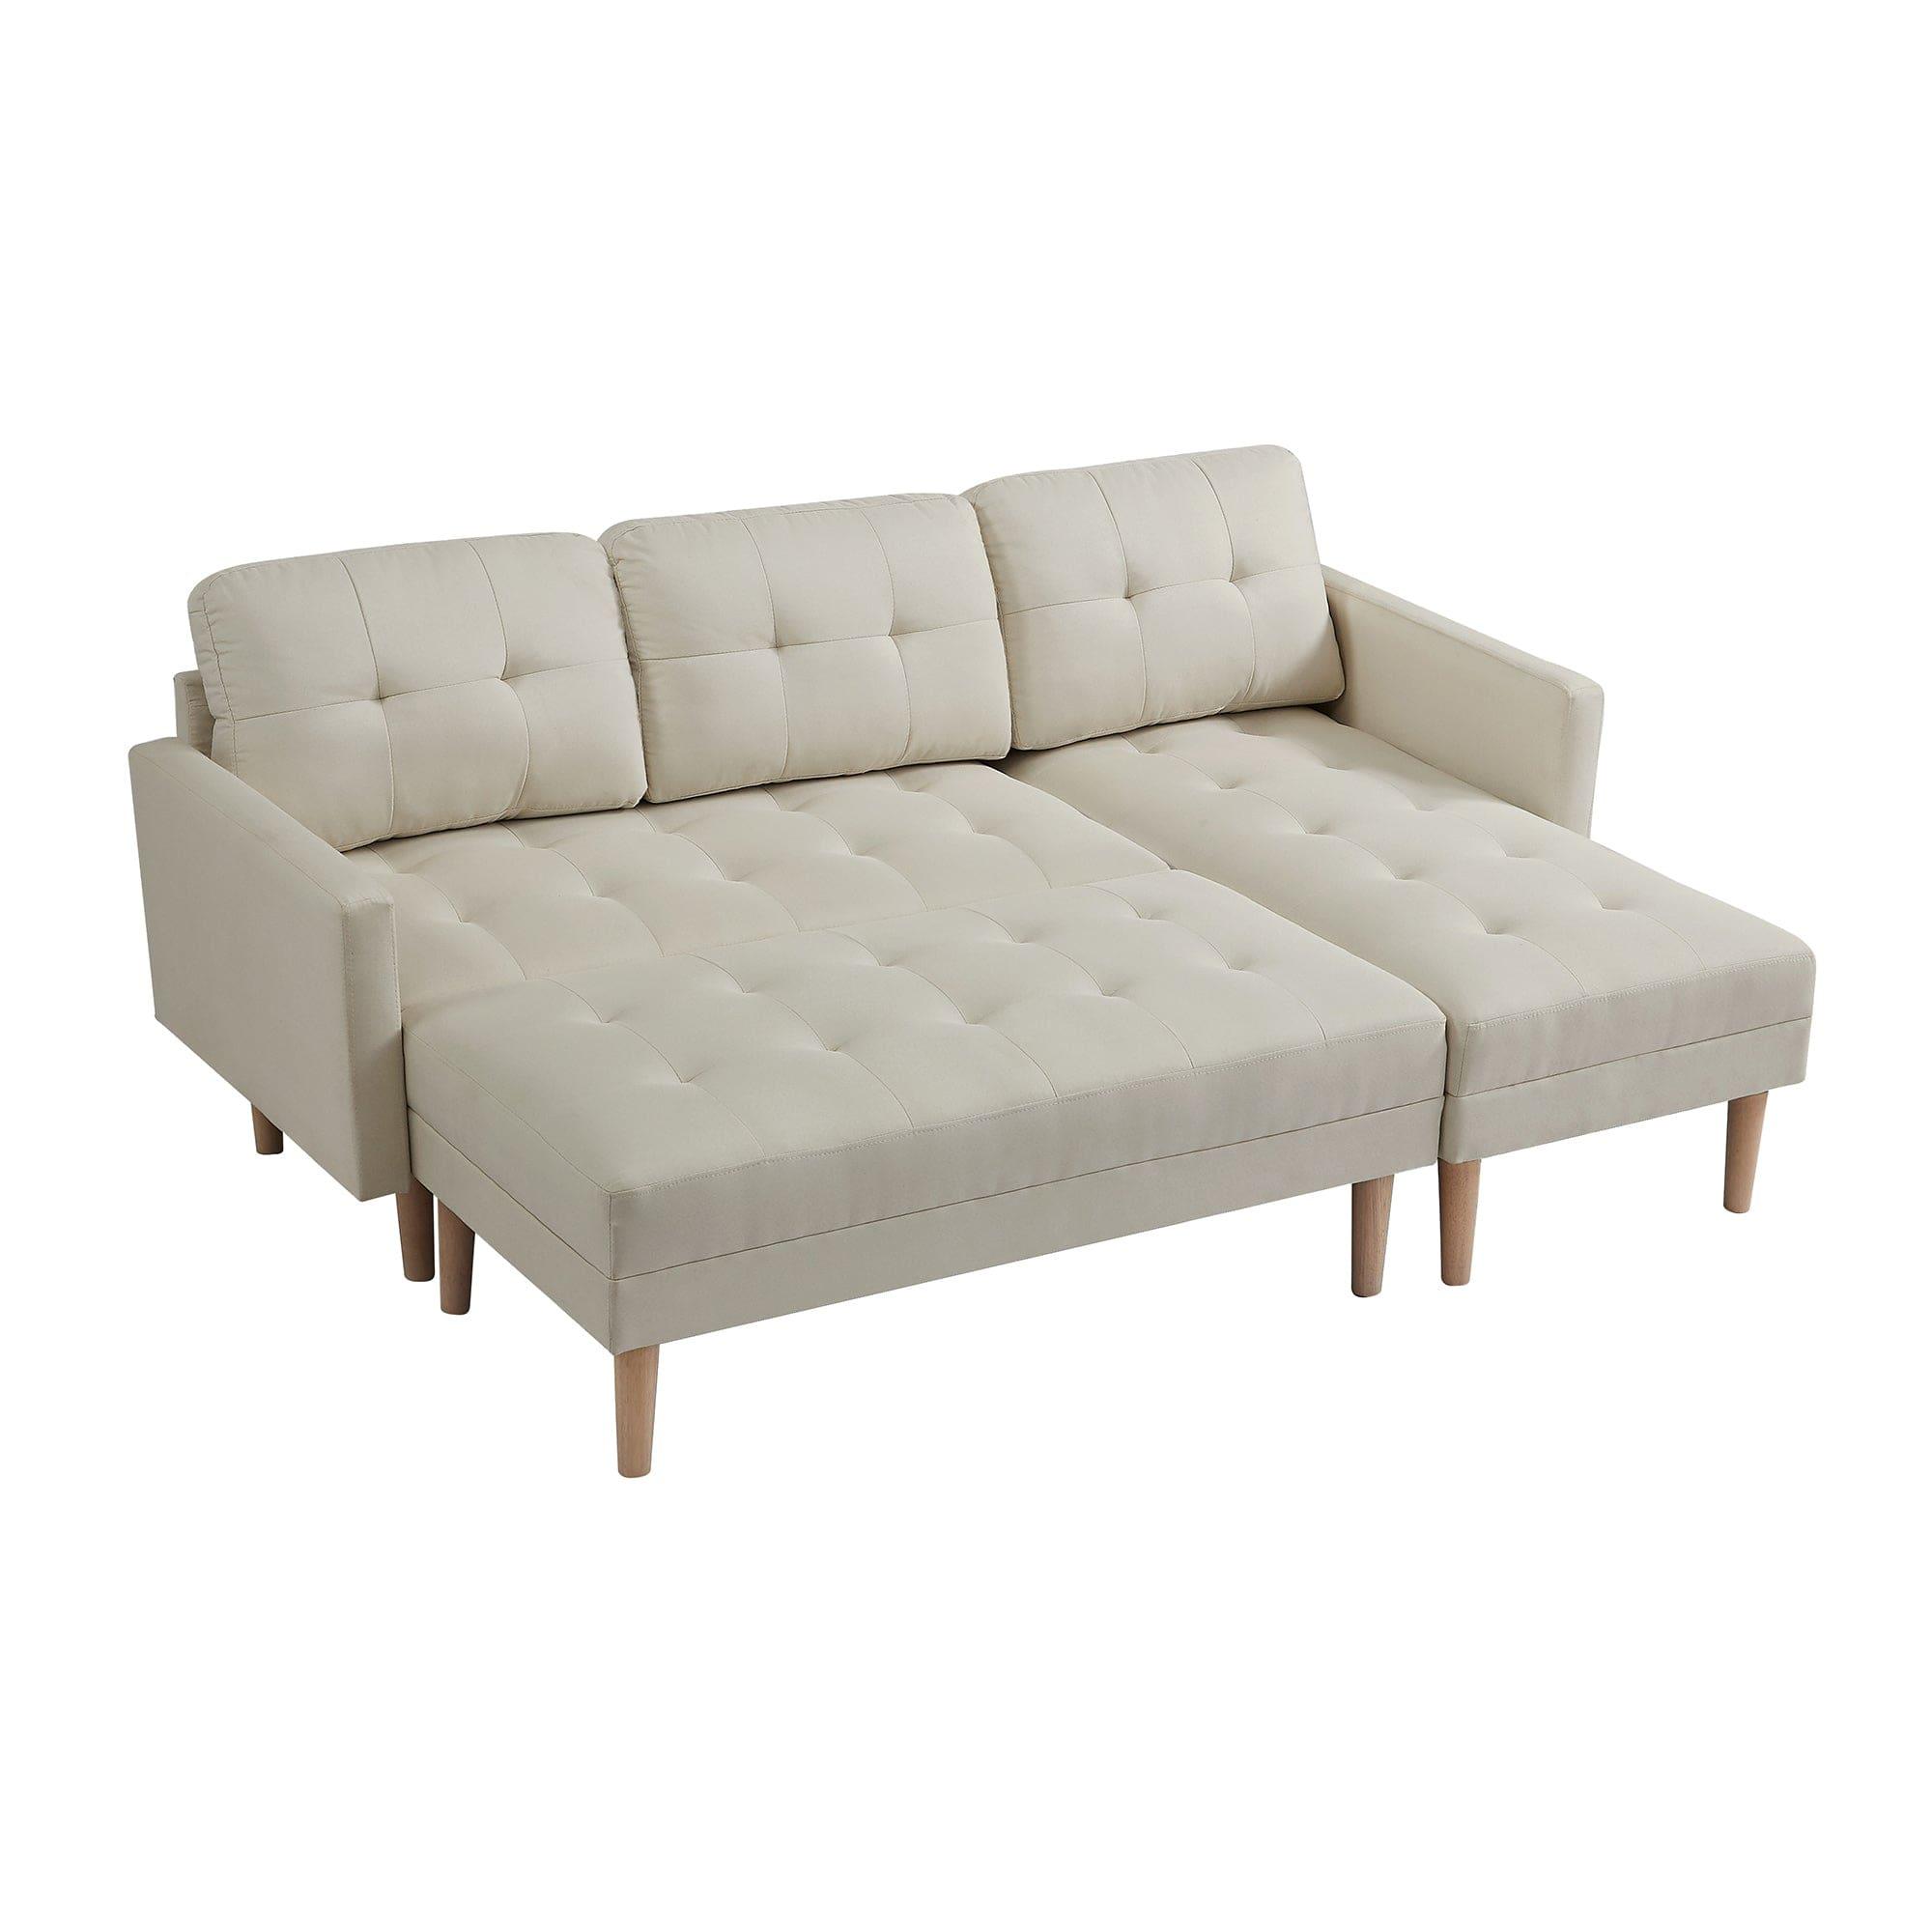 Shop Beige Sectional Sofa Bed , L-shape Sofa Chaise Lounge with Ottoman Bench Mademoiselle Home Decor